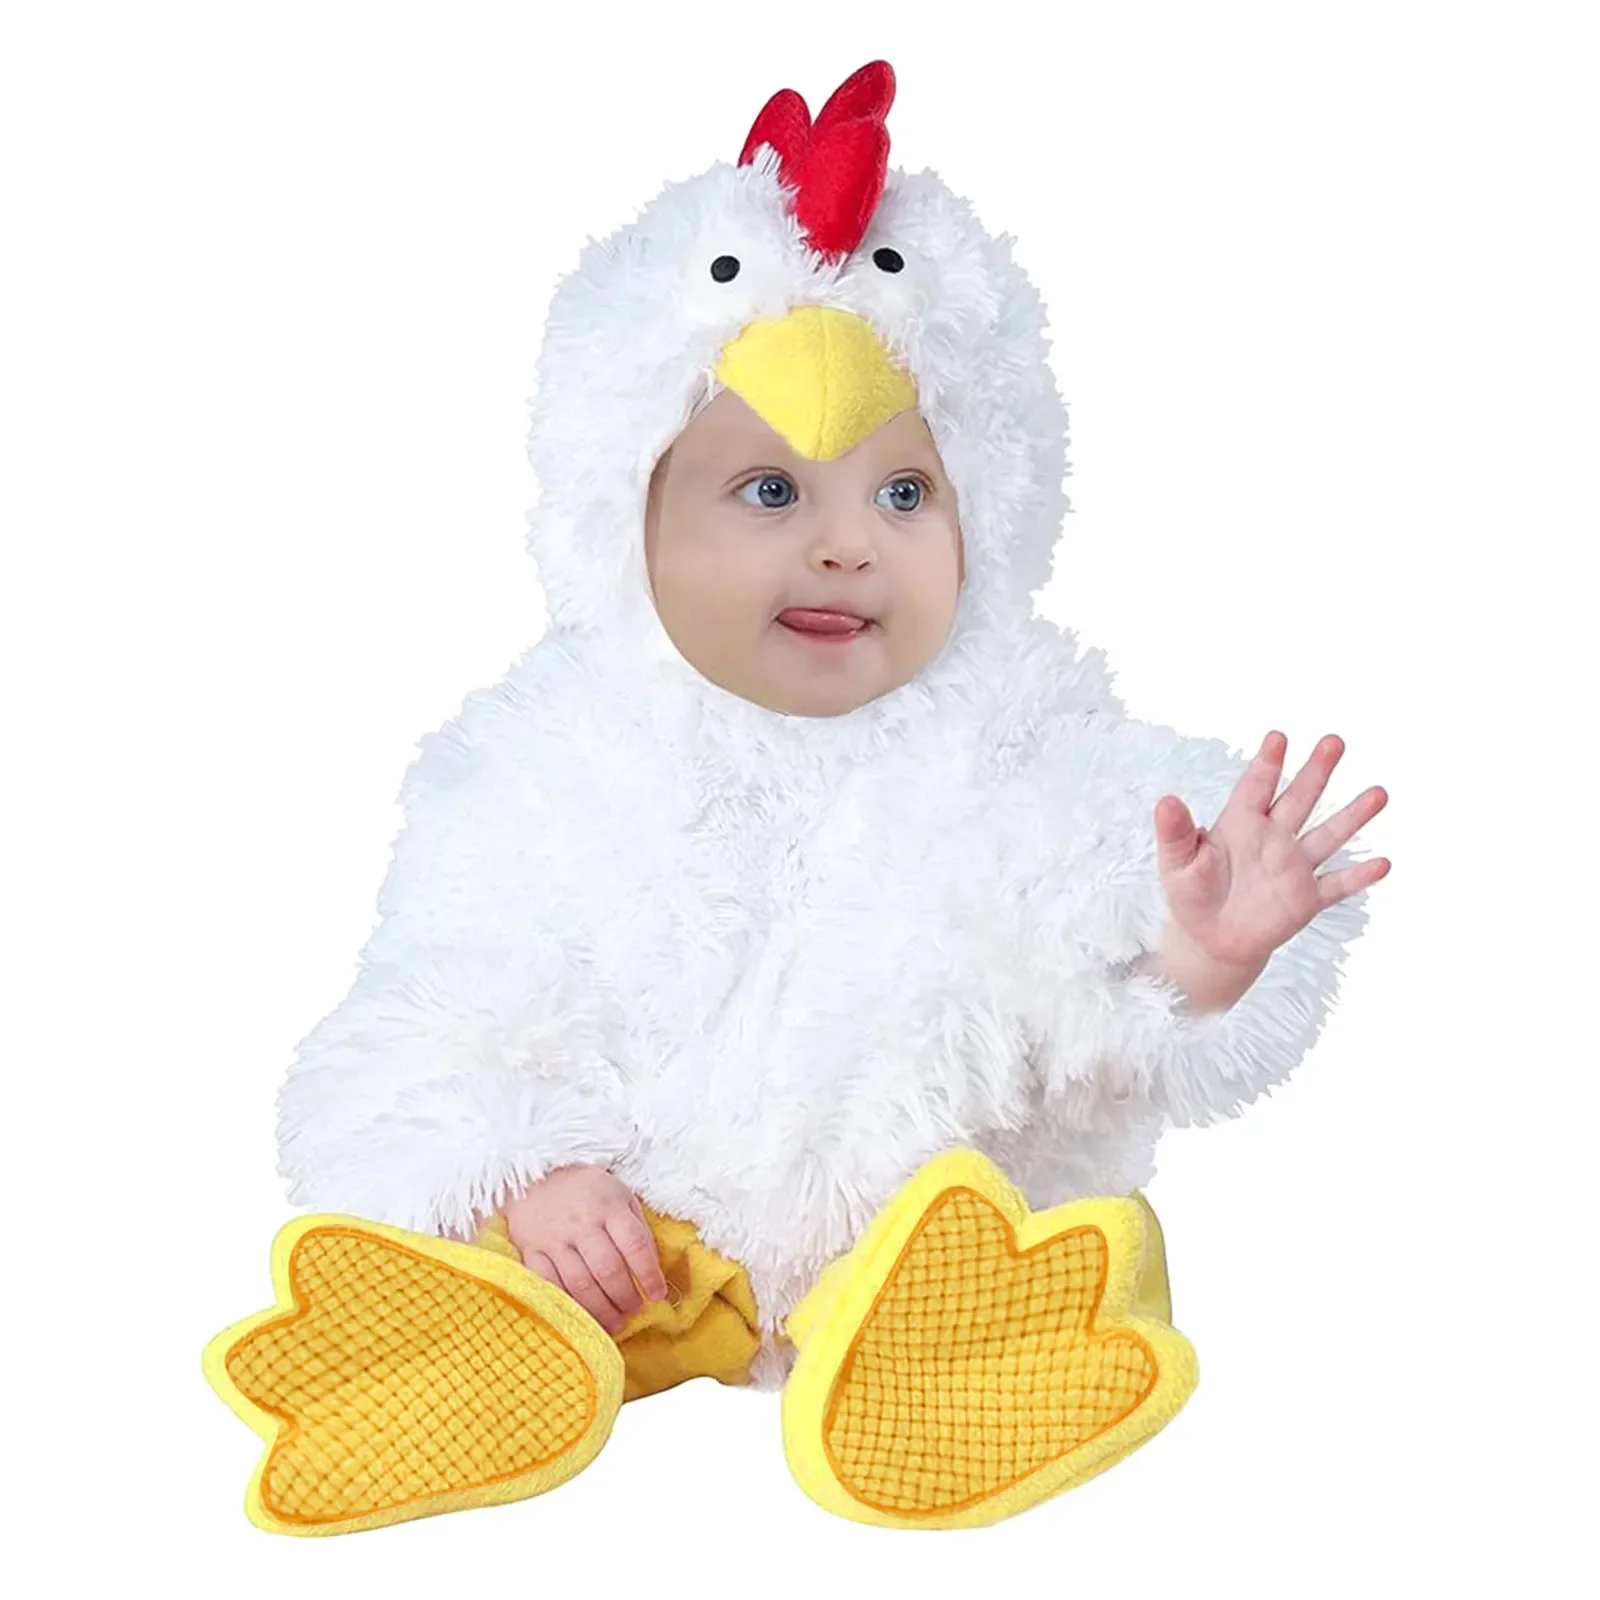 

Baby Chicken Chick Costume For Boys Girls Infant Fleece Rompers Jumpsuit With Shoes Halloween Easter Fancy Dress 6m 12m 18m